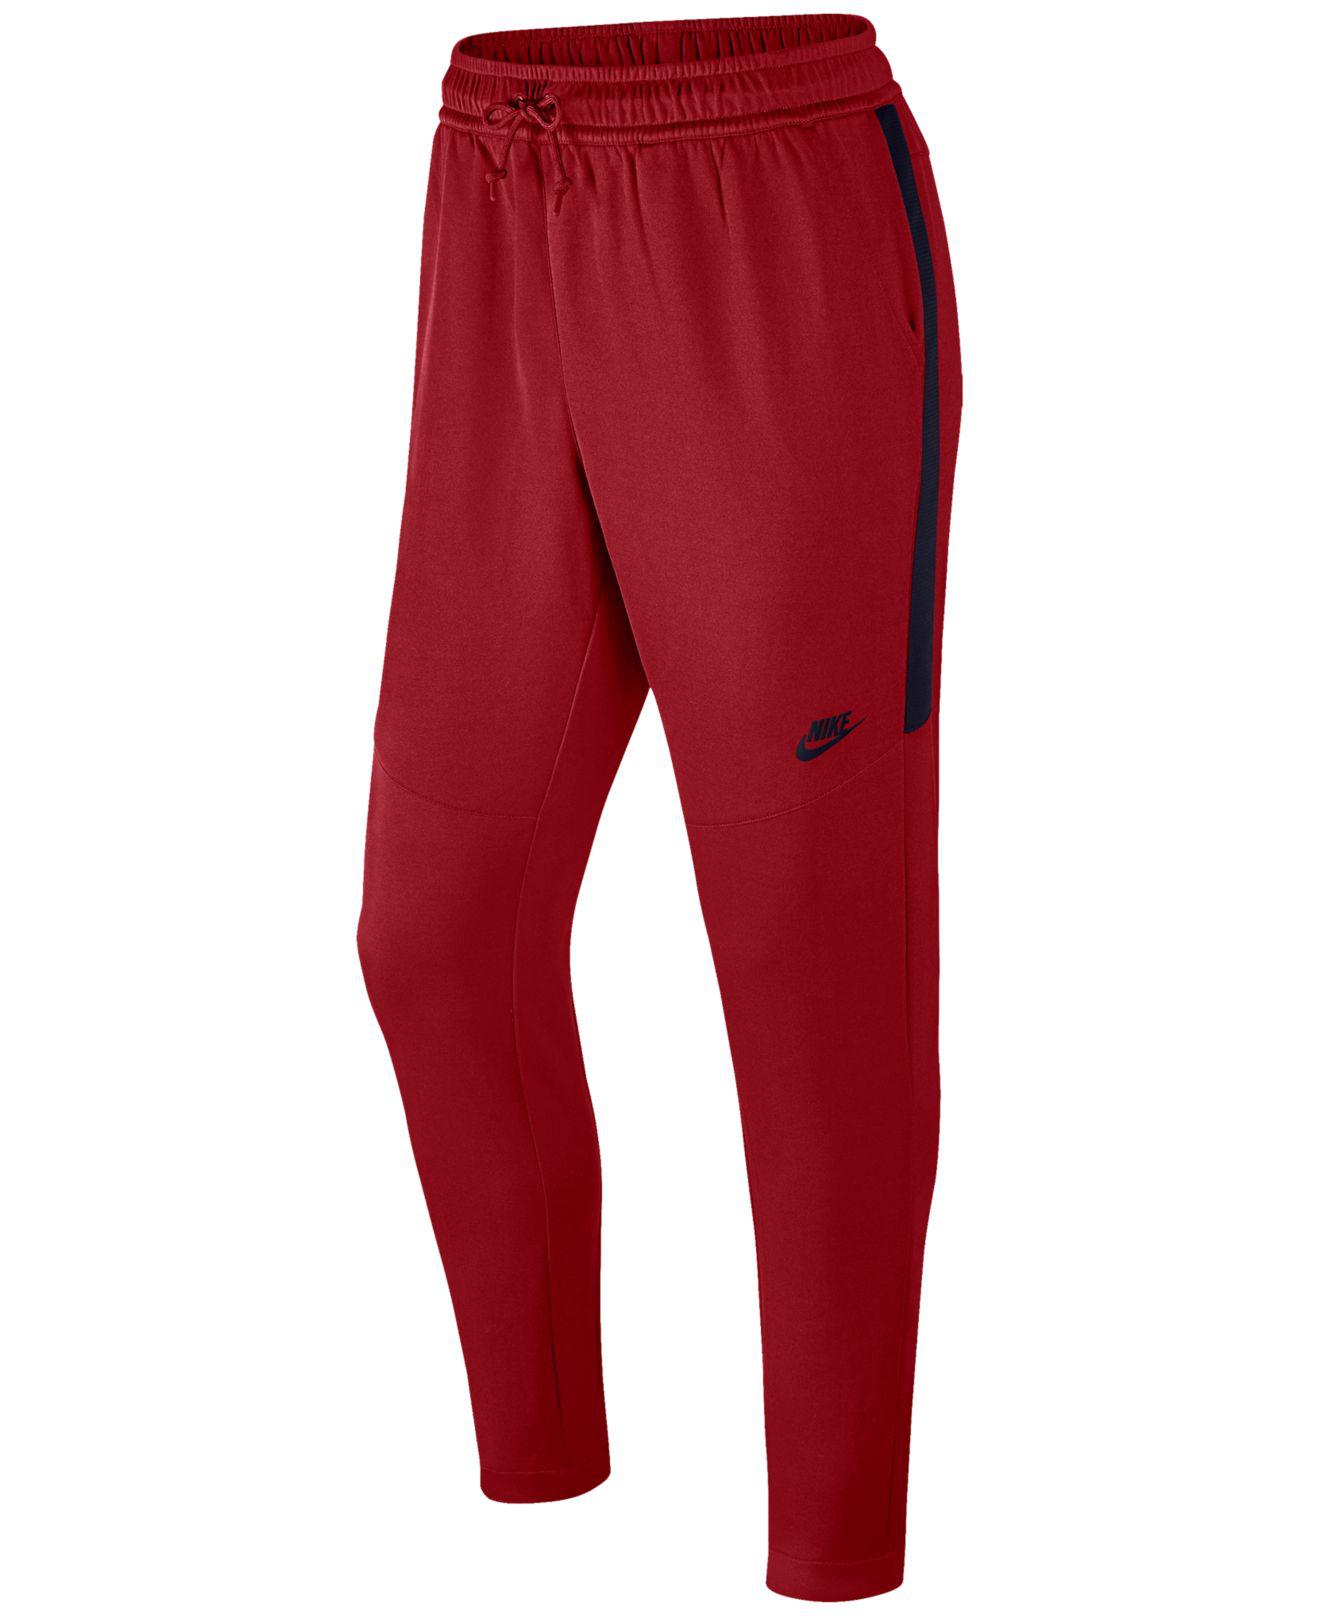 Nike Cotton Tribute Pants in Red for 